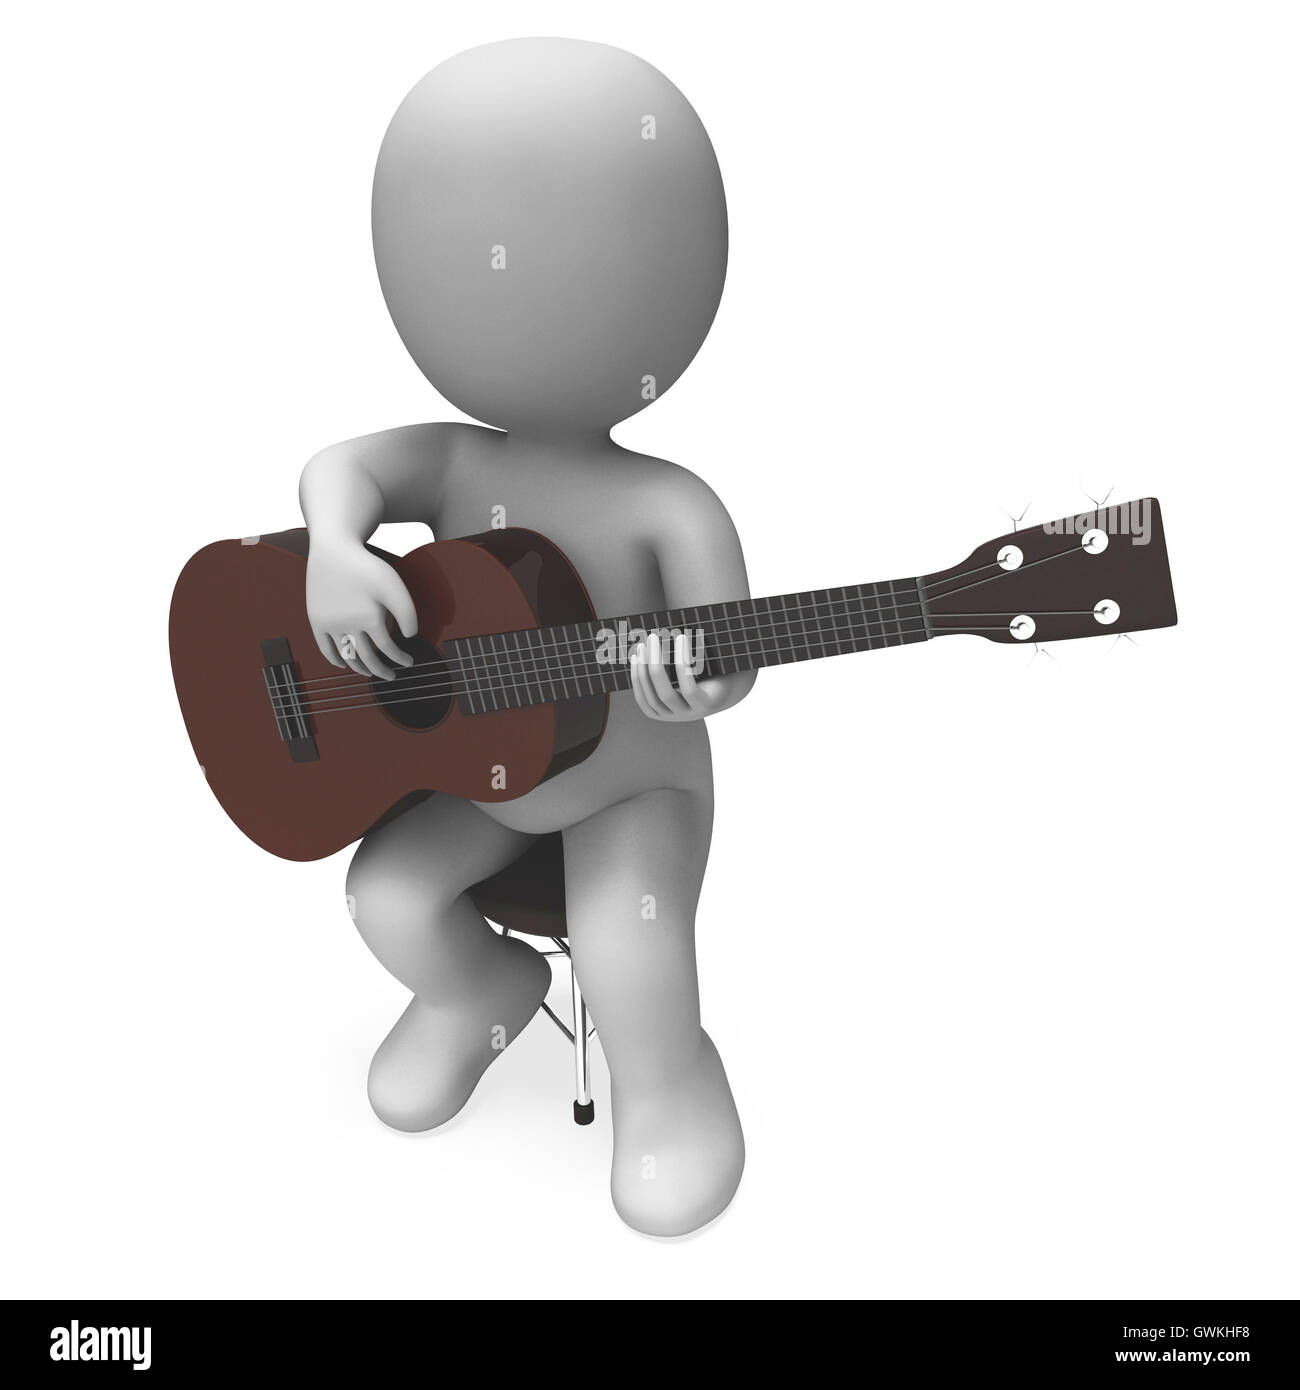 Acoustic Guitarist Character Shows Guitar Music And Performing Stock Photo